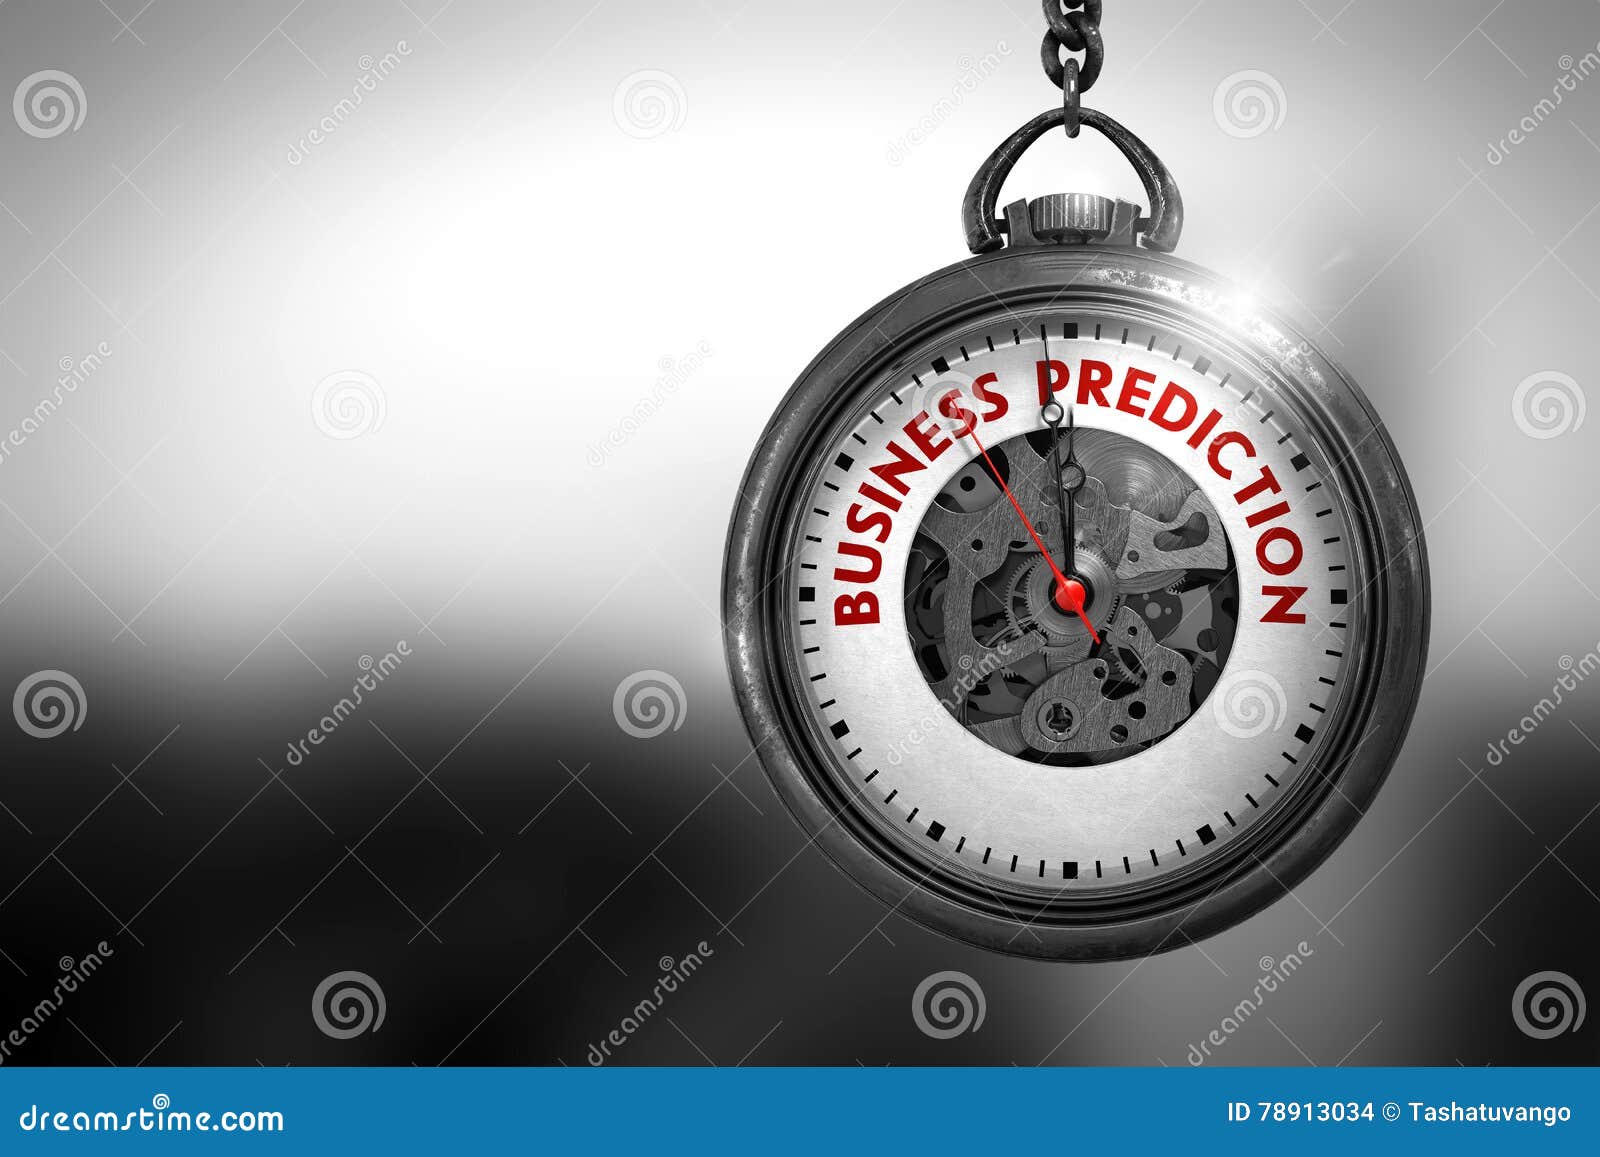 business prediction on pocket watch. 3d .